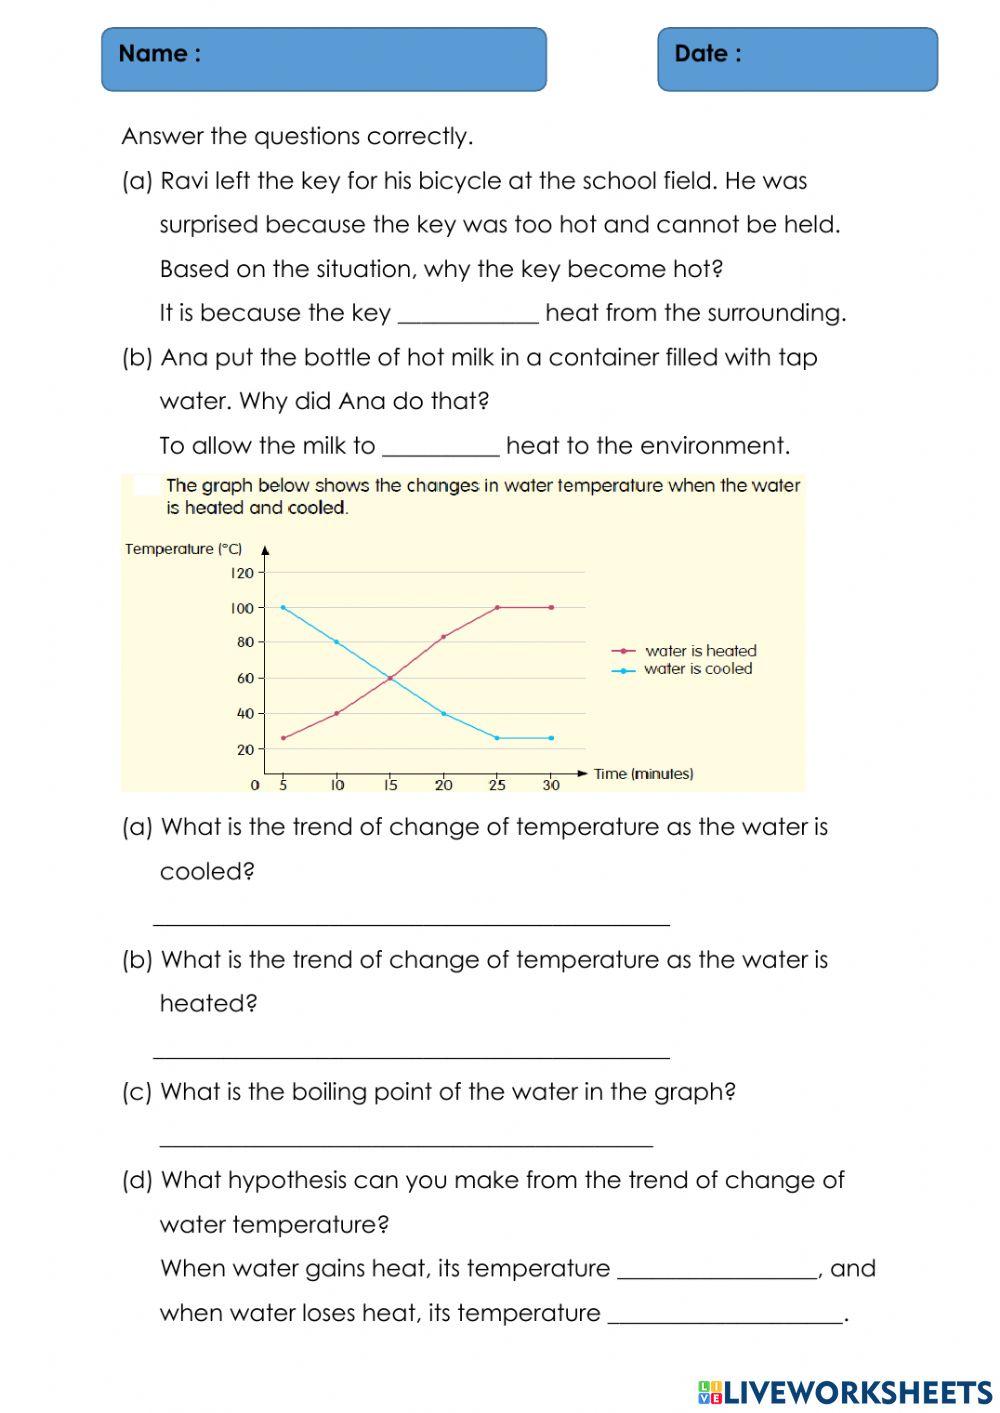 Heat - changes of water temperature